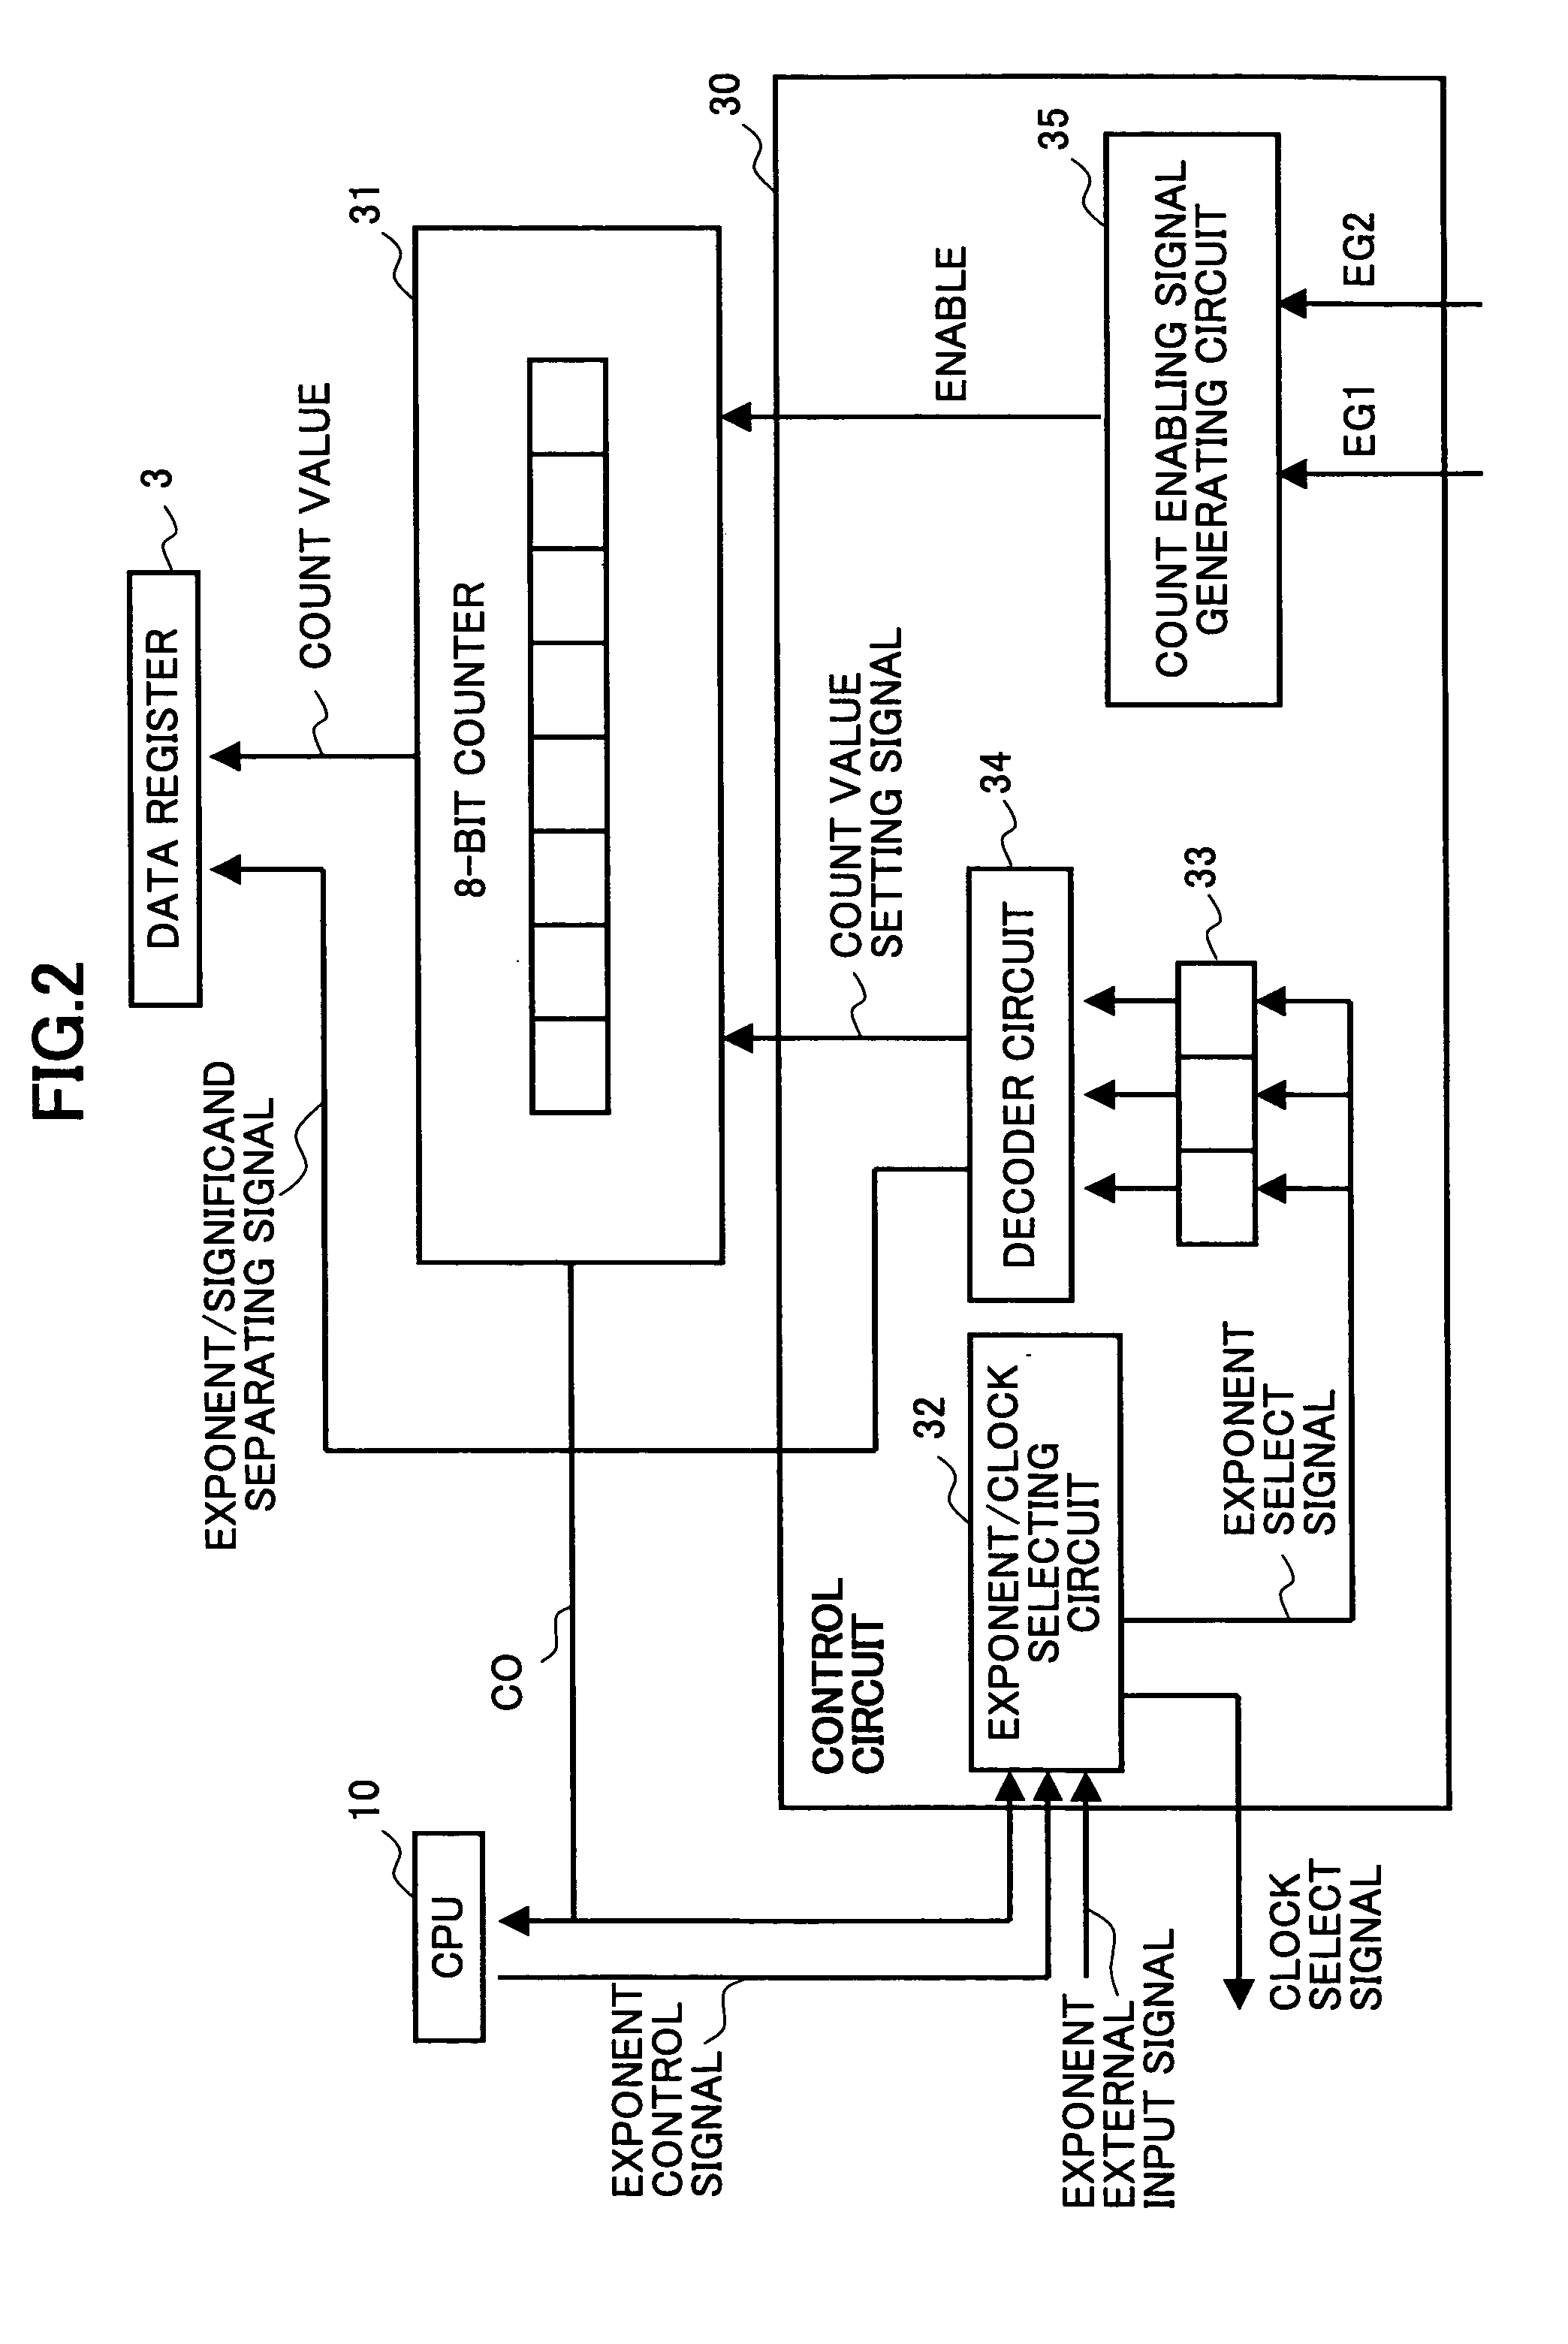 Pulse width measuring device with automatic range setting function